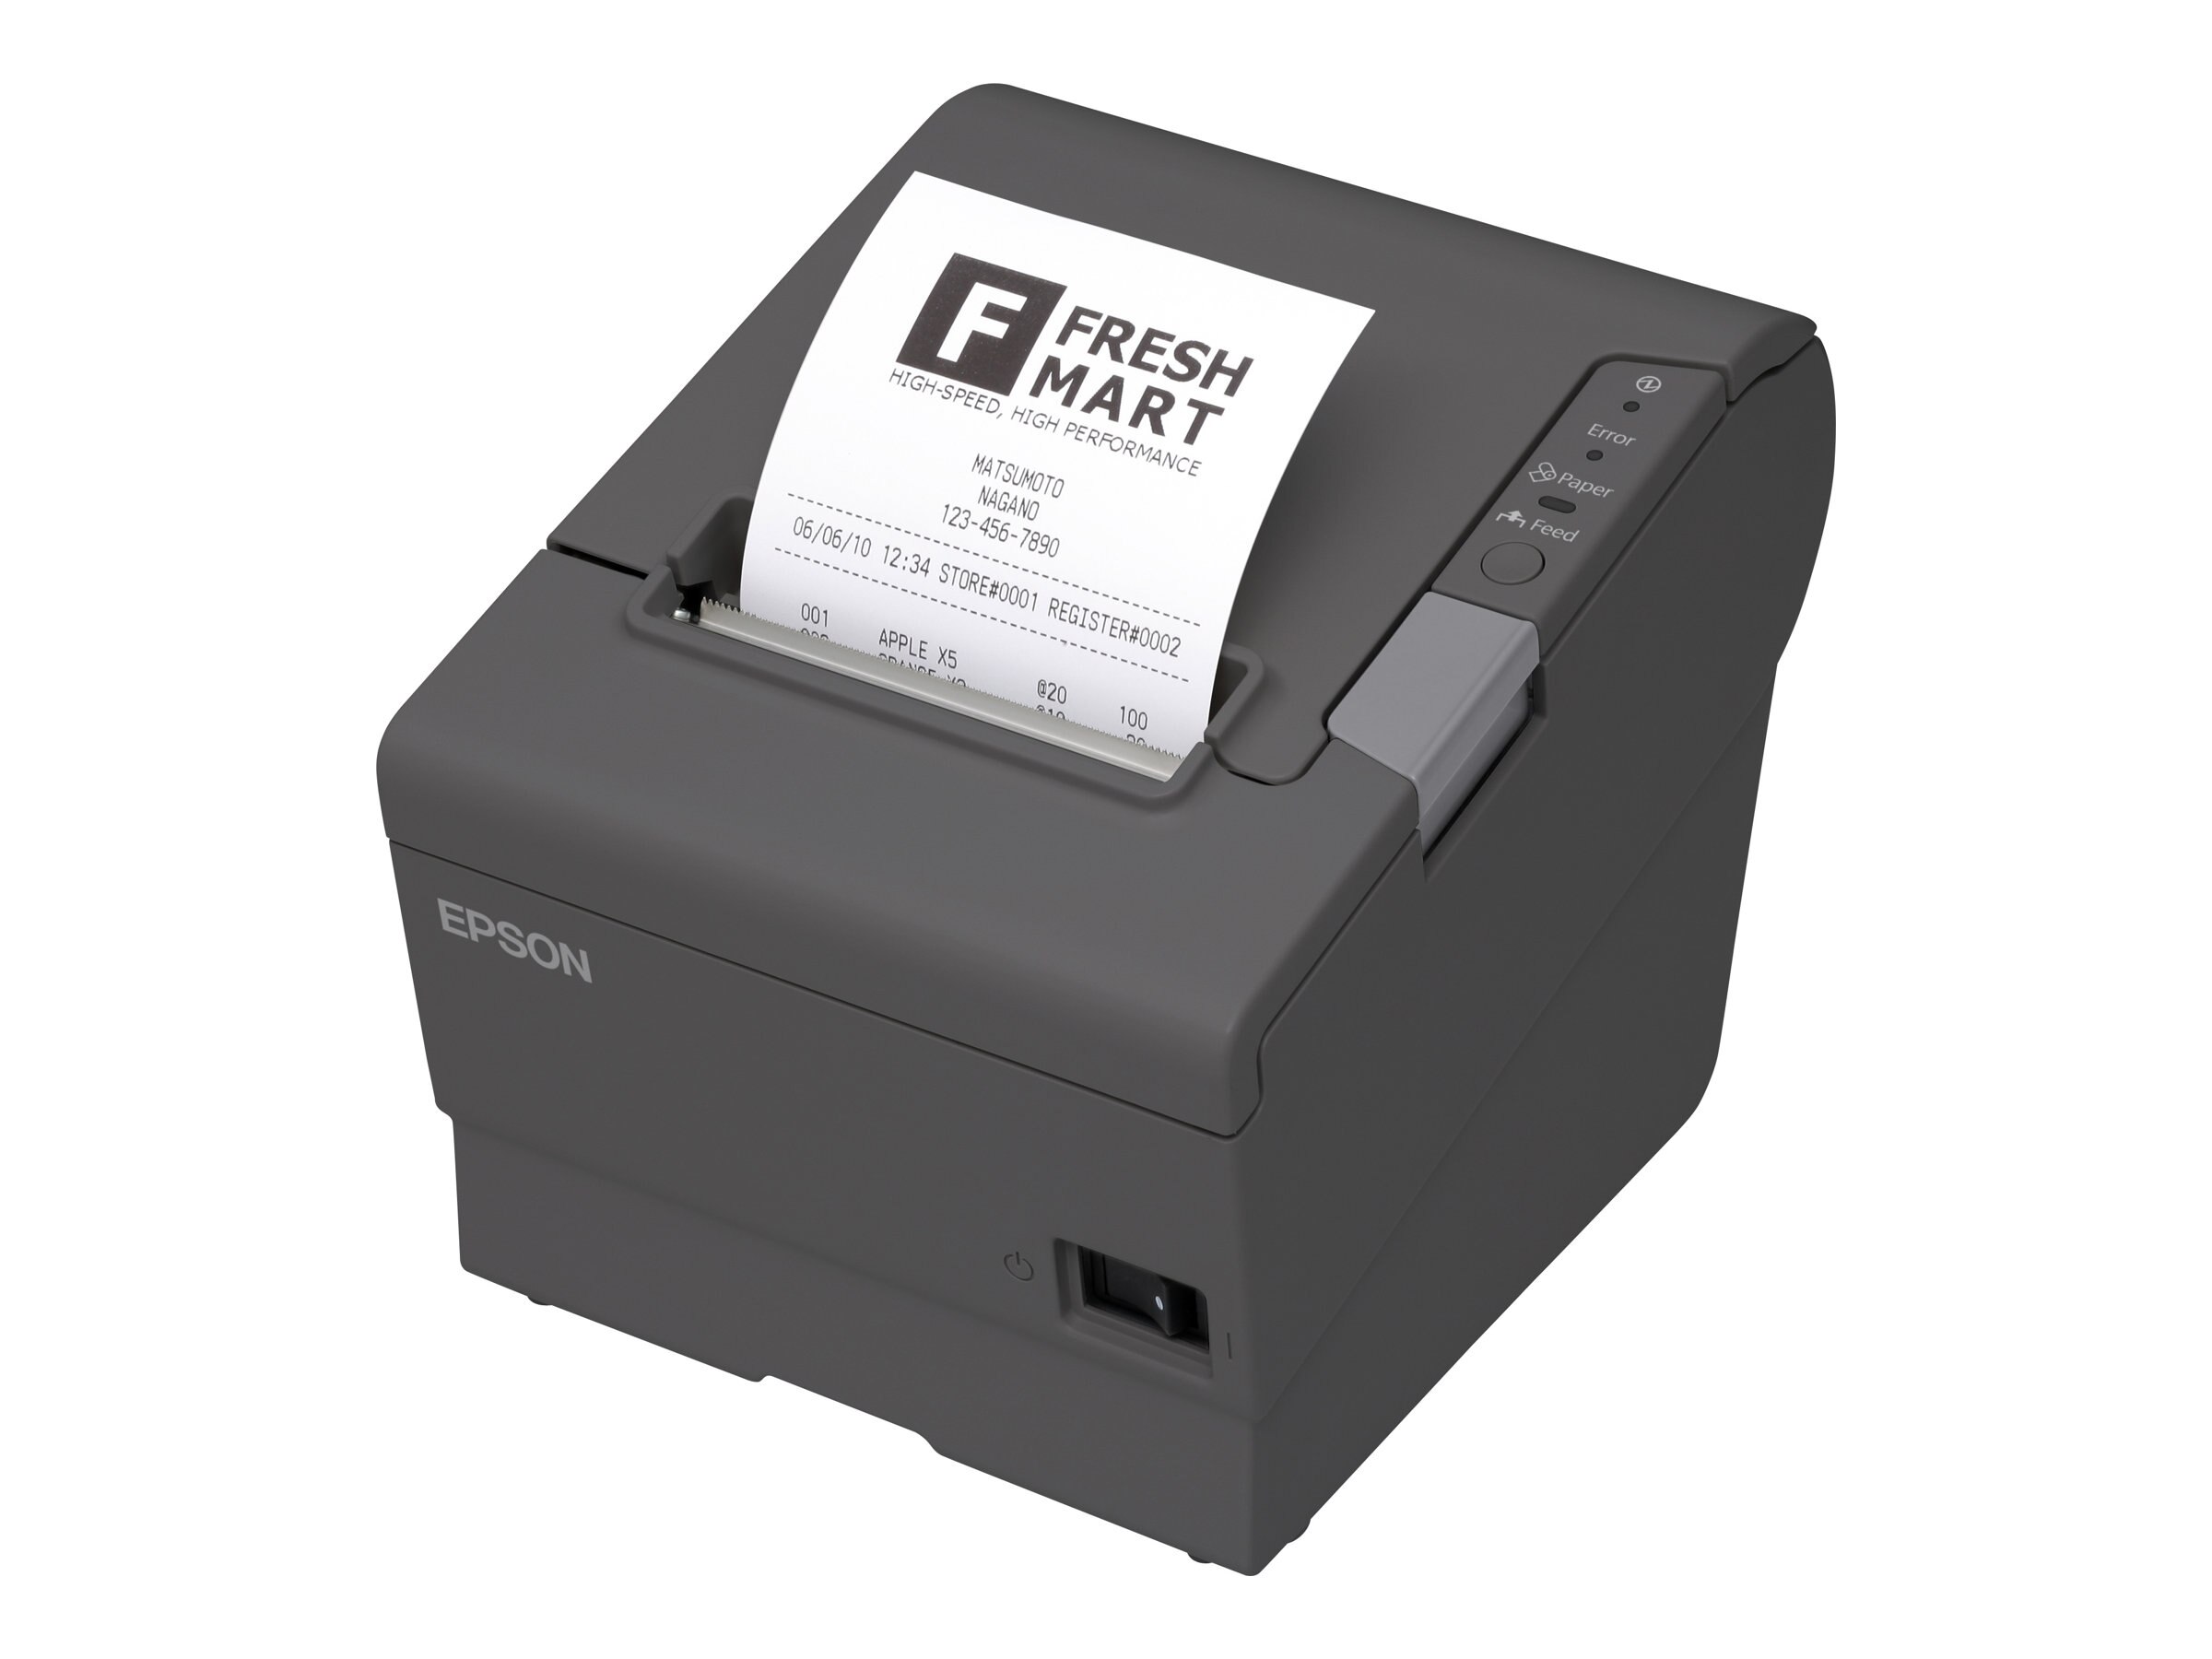 Buy Epson Tm T88v Usb Serial Pos Printer Dark Gray W Ps180 Power At Connection Public Sector 3443